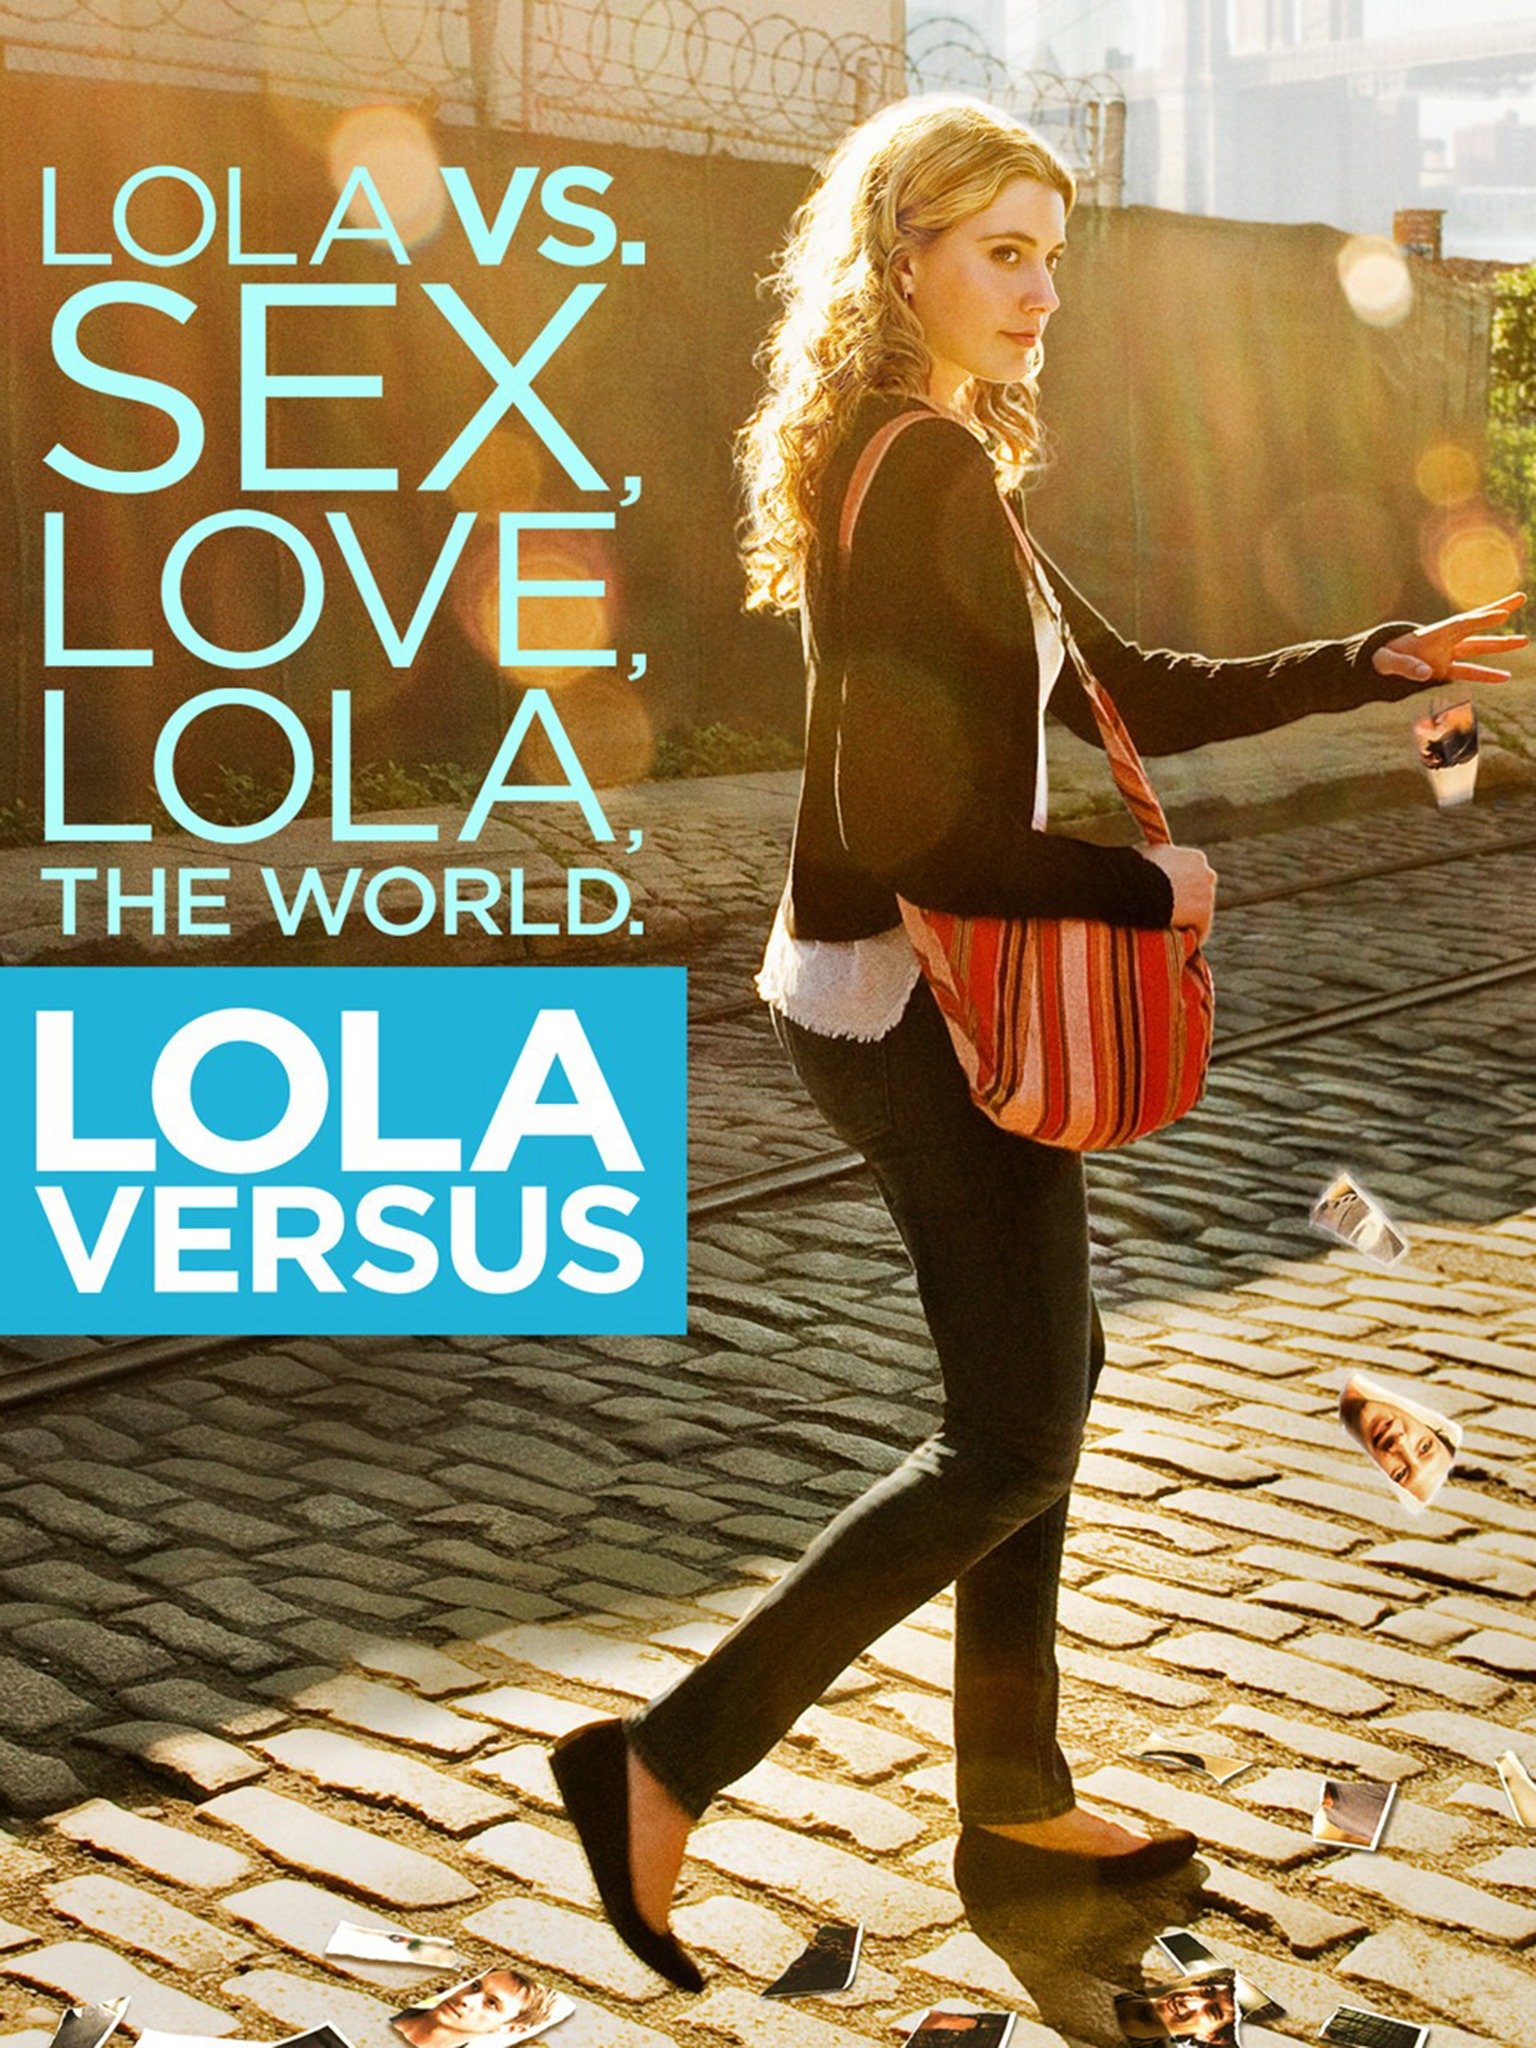 Hot girl Lola and old man in love